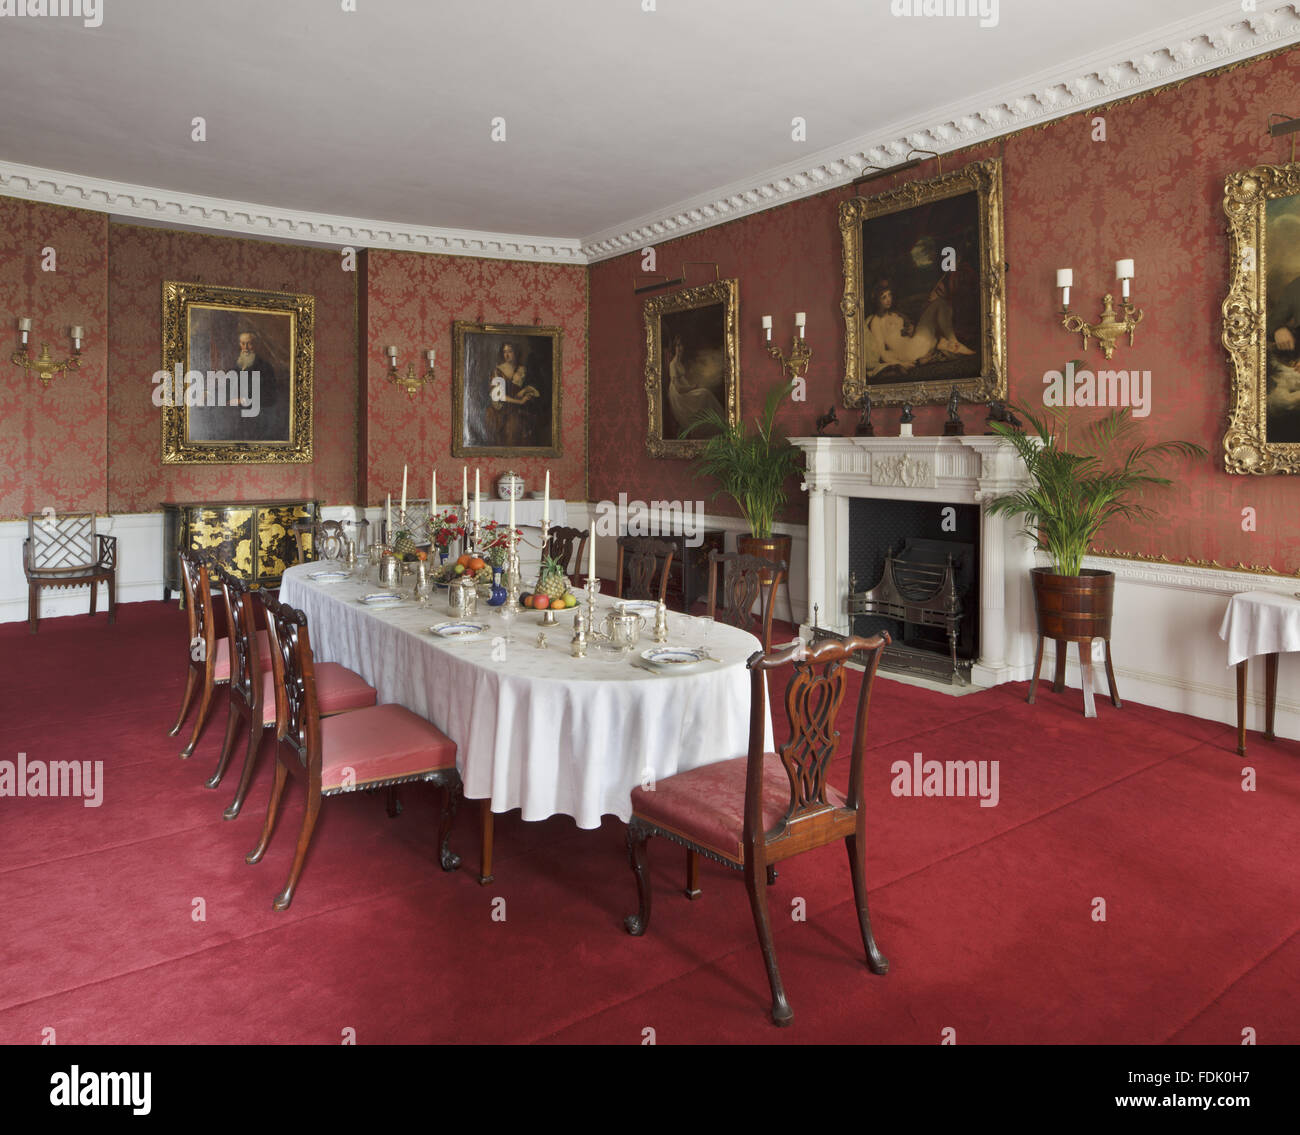 The Dining Room at Polesden Lacey, Surrey. The Dining Room was designed by Poynter in 1903-5 but the mahogany dining table of c.1800 is not original to the room. The set of eight mahogany dining-chairs are late 19th-century, in the style of Thomas Chippen Stock Photo